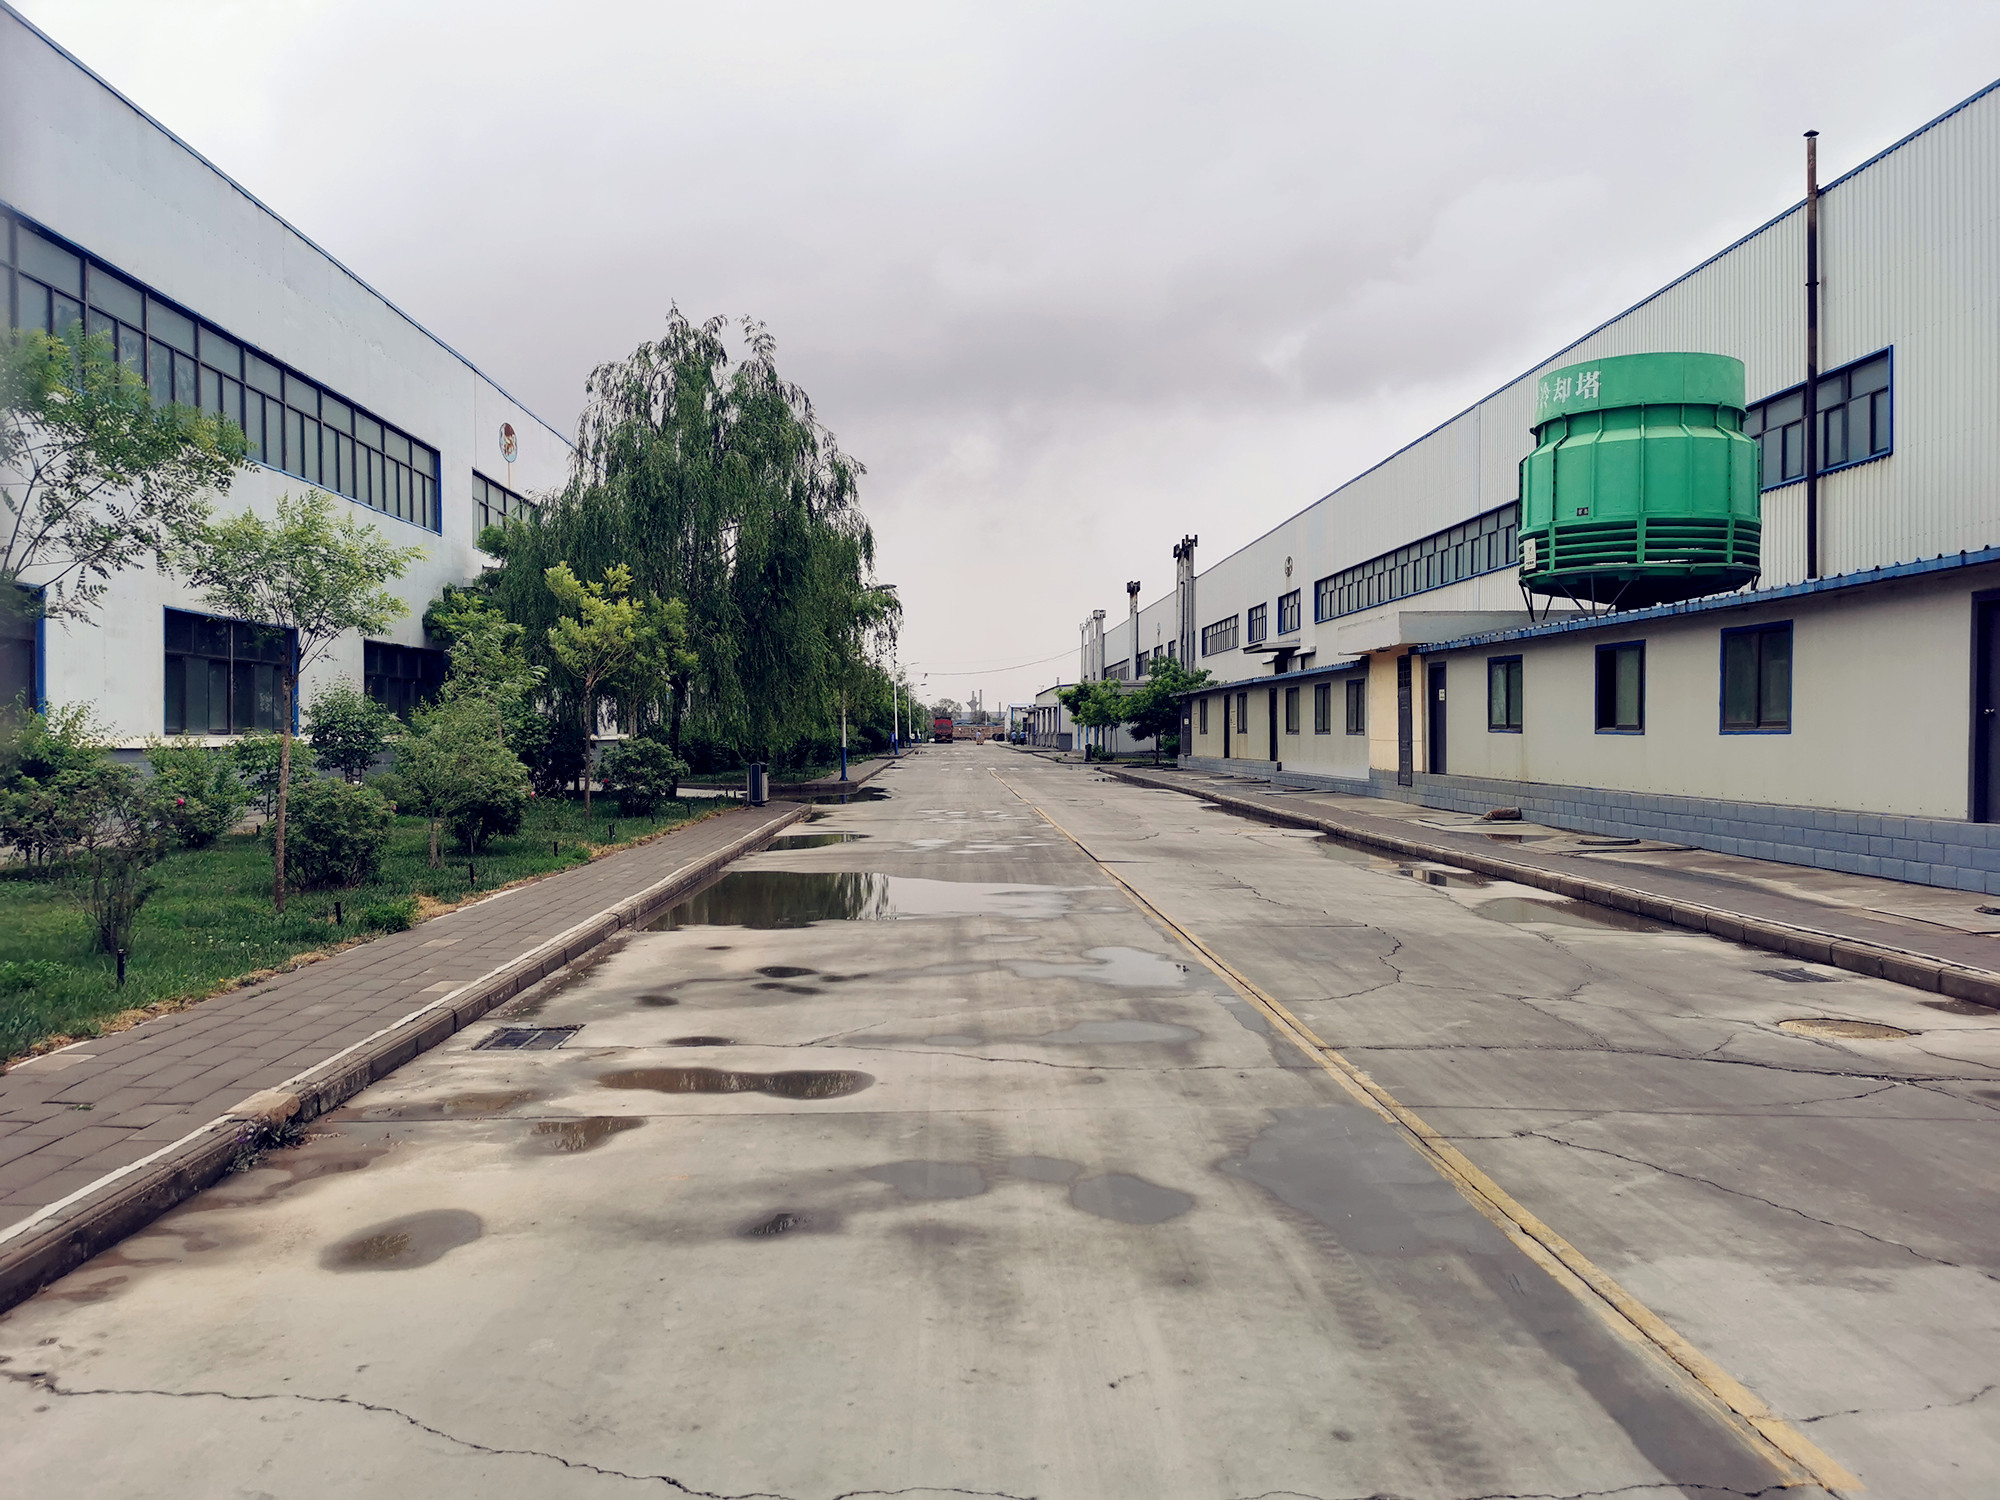 Welcome to visit our new factory!